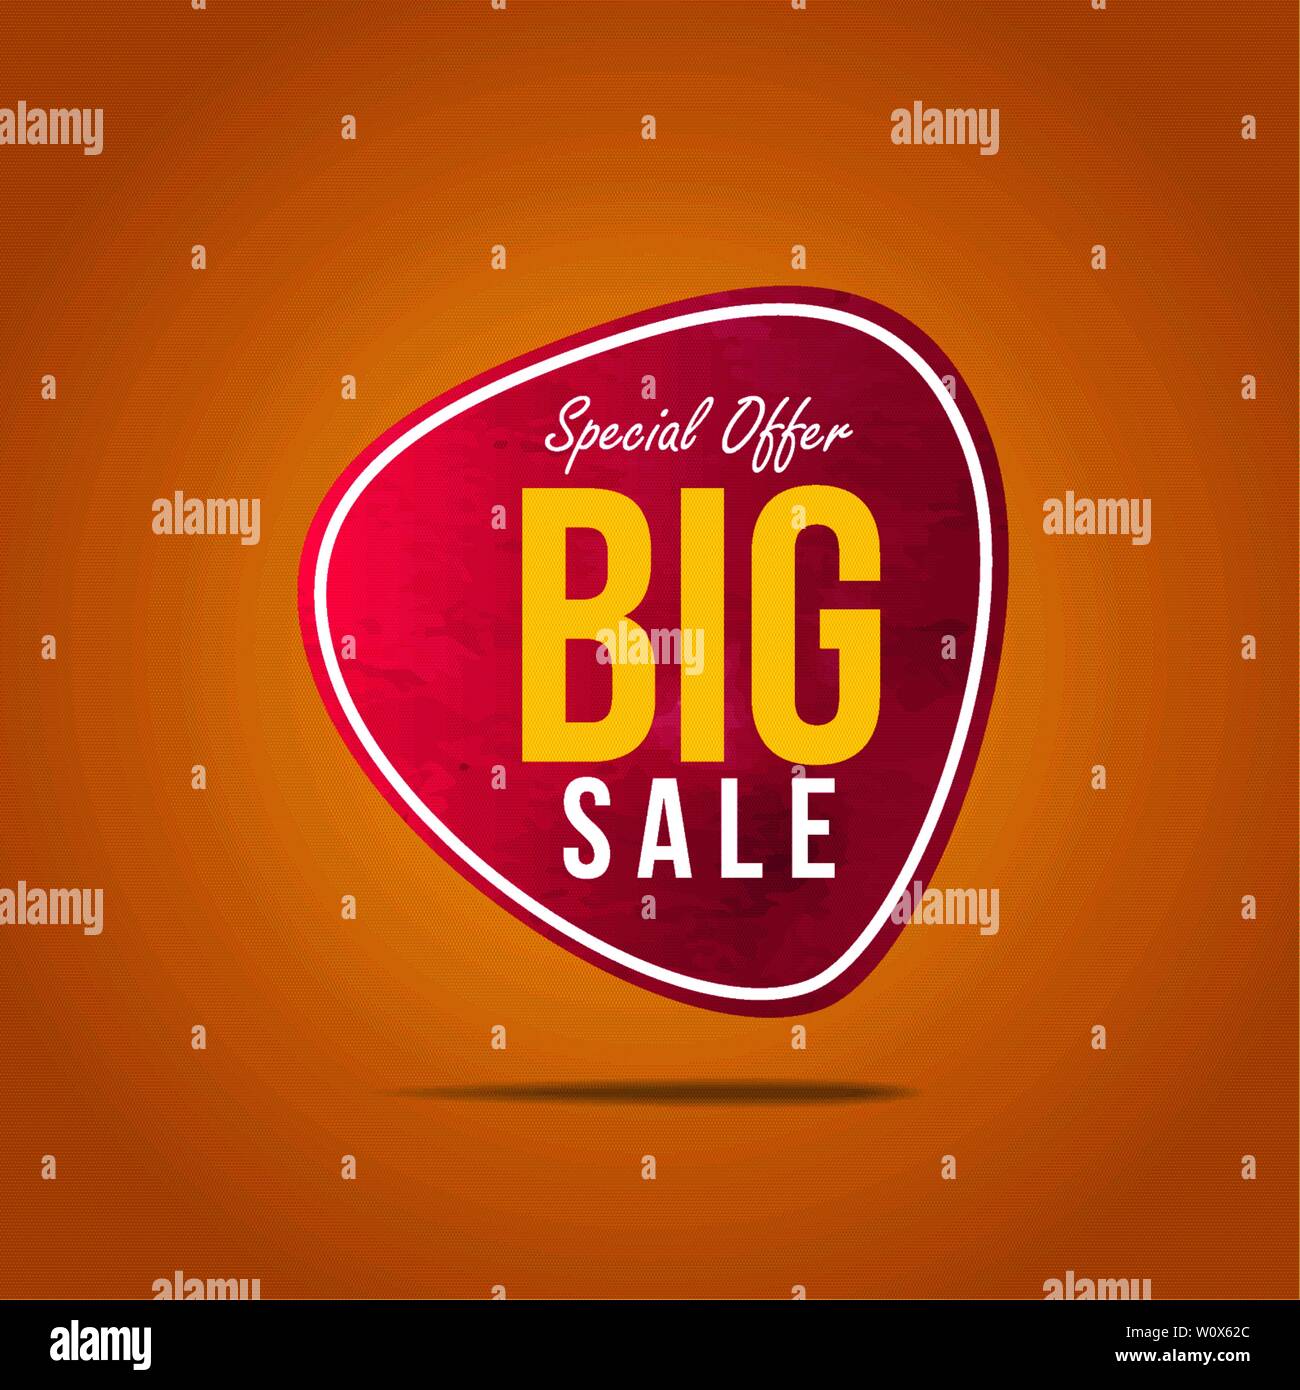 Big Summer sale offer label sticker, sale discount price tag, label design for your discount campaign promotion in several occasion season sales Stock Vector